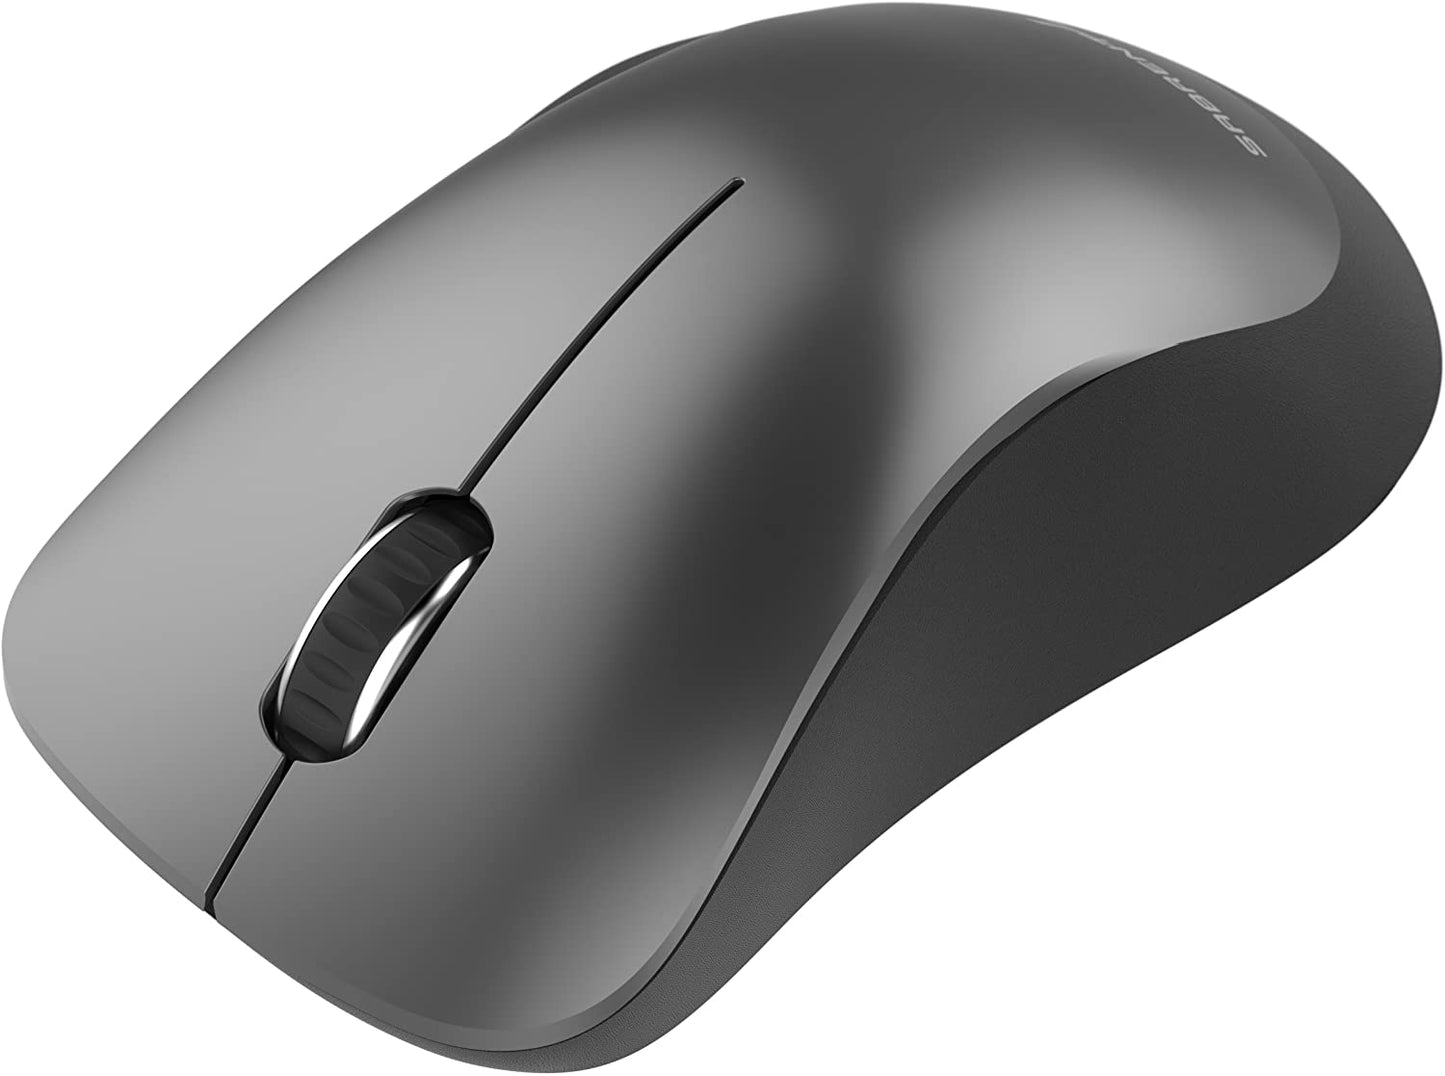 Sabrent 3-Button Bluetooth Optical Mouse Mice